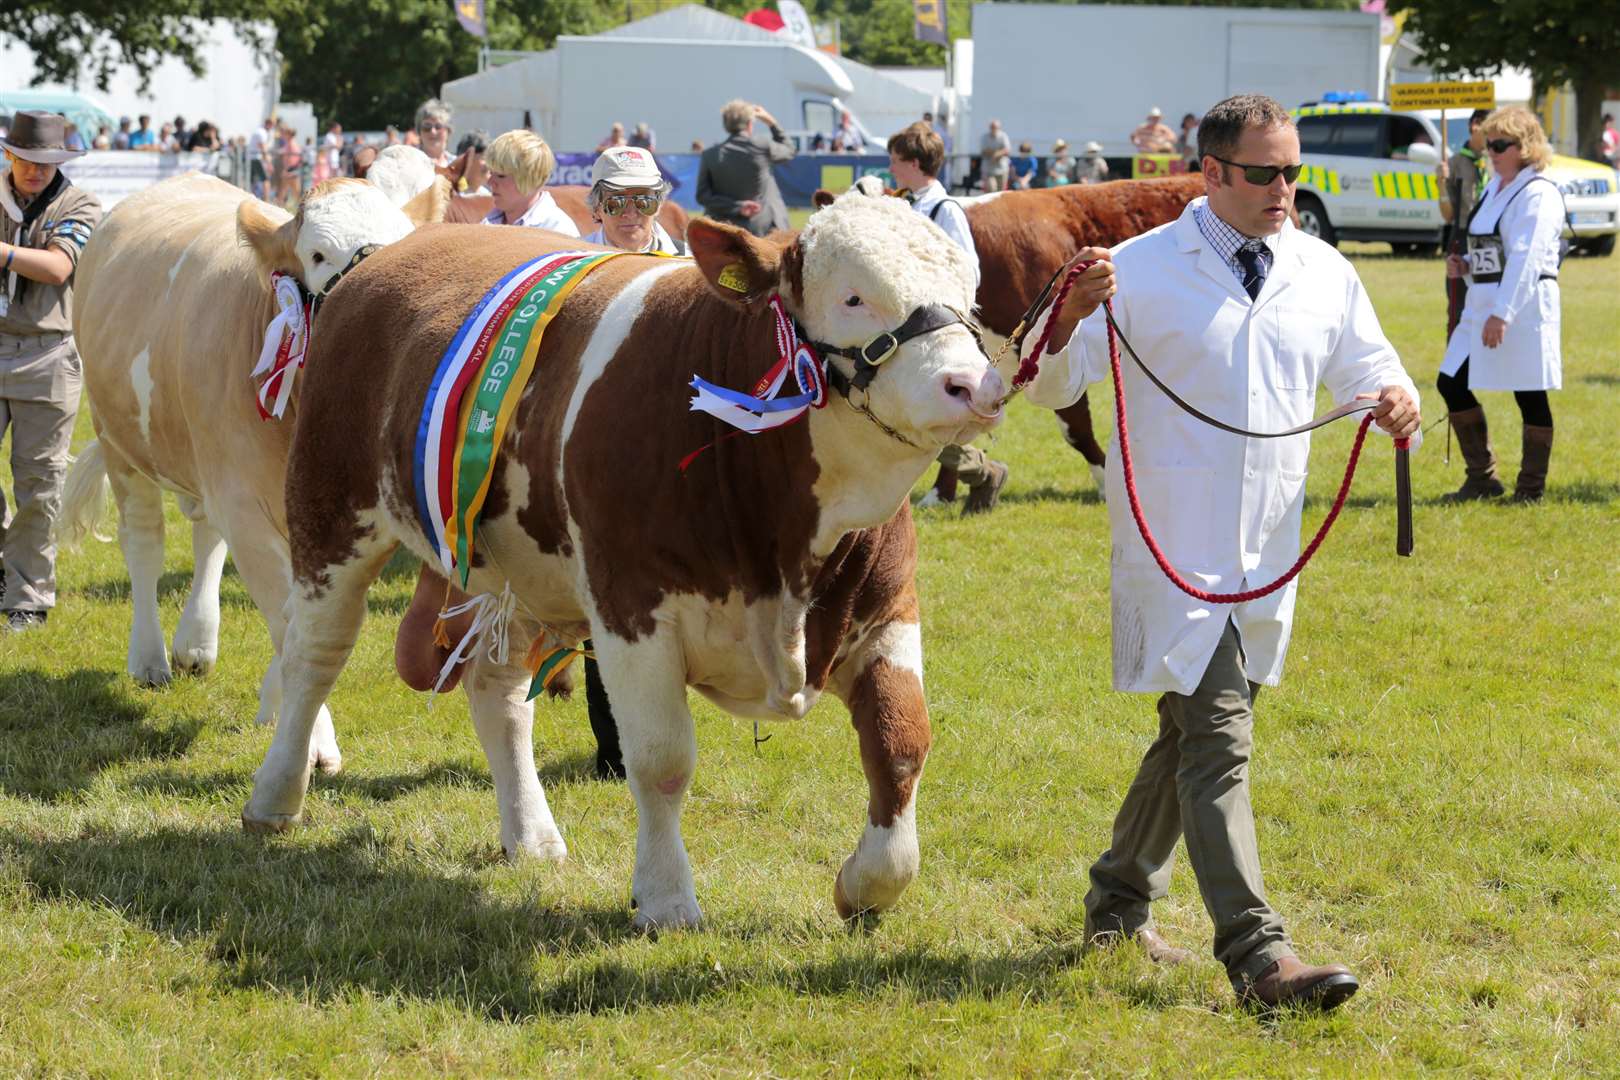 Livestock at last year's show